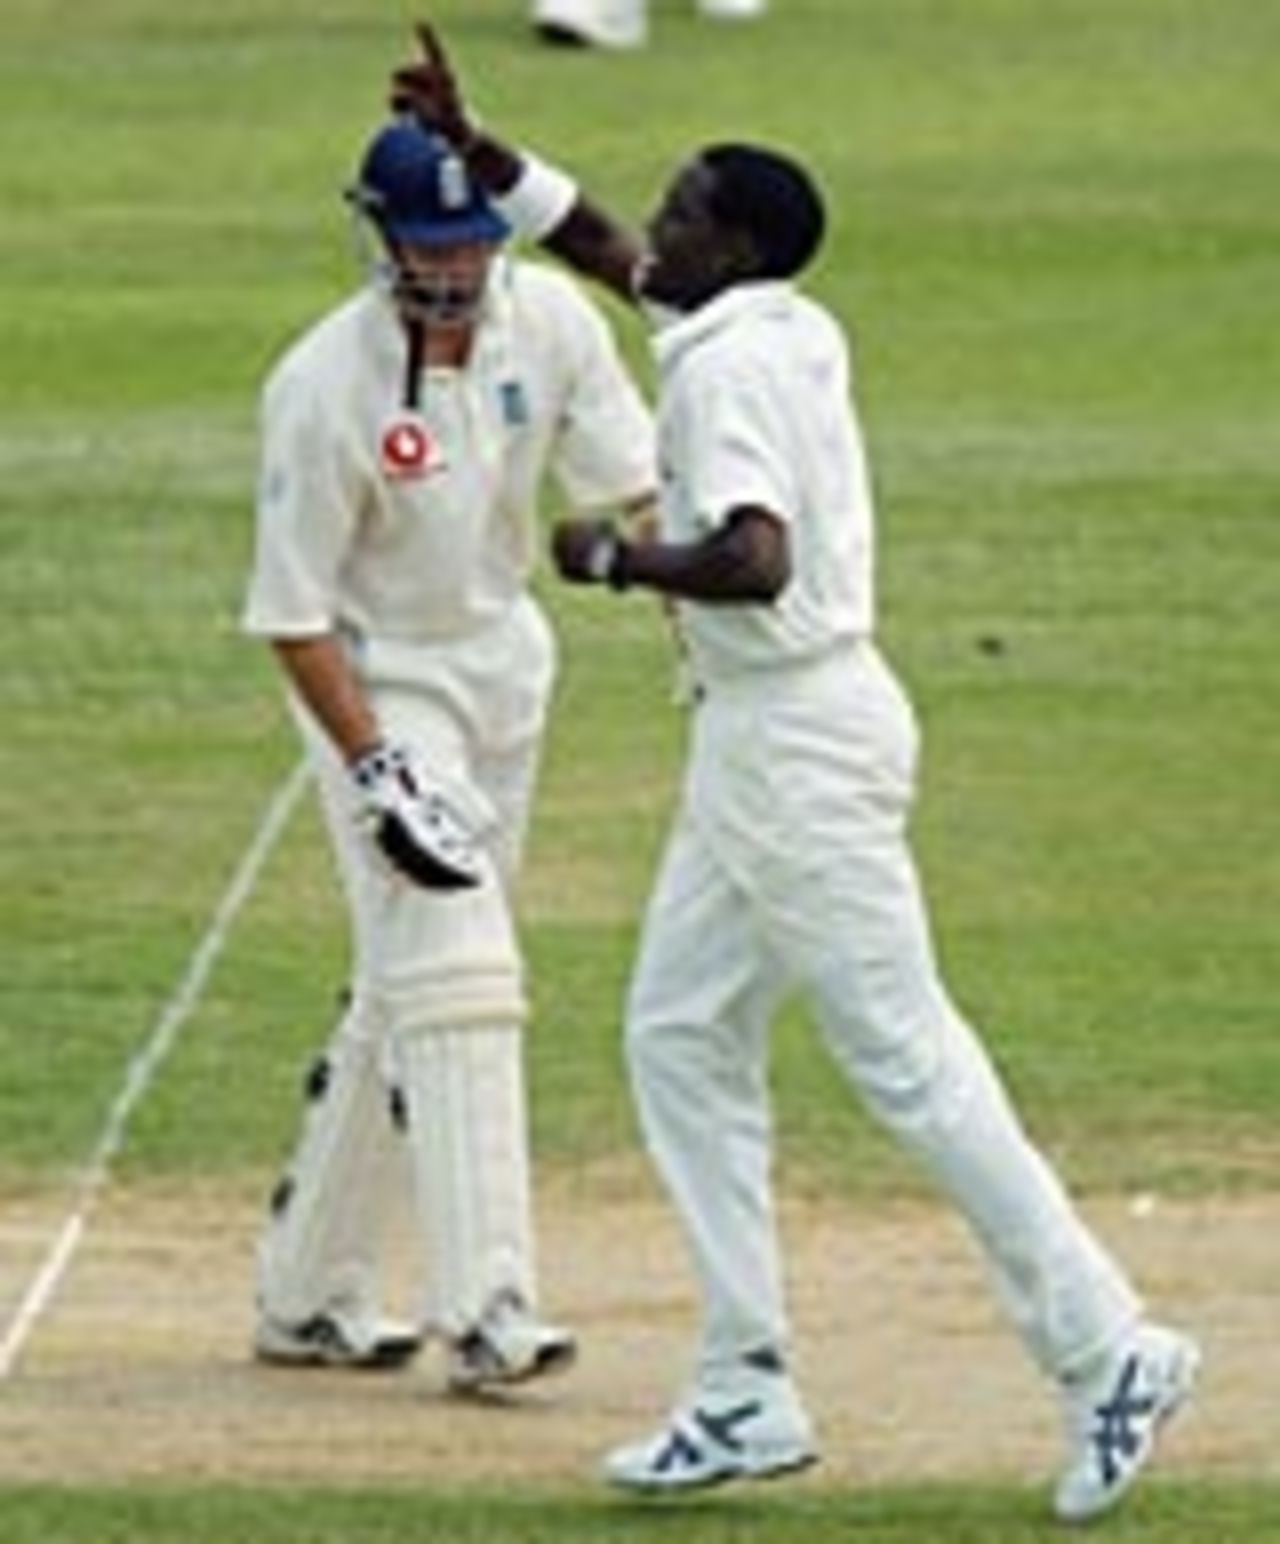 Michael Vaughan bowled by Jermaine Lawson for 105 on the opening day of the tour, Jamaica v England XII, Sabina Park, March 1, 2004